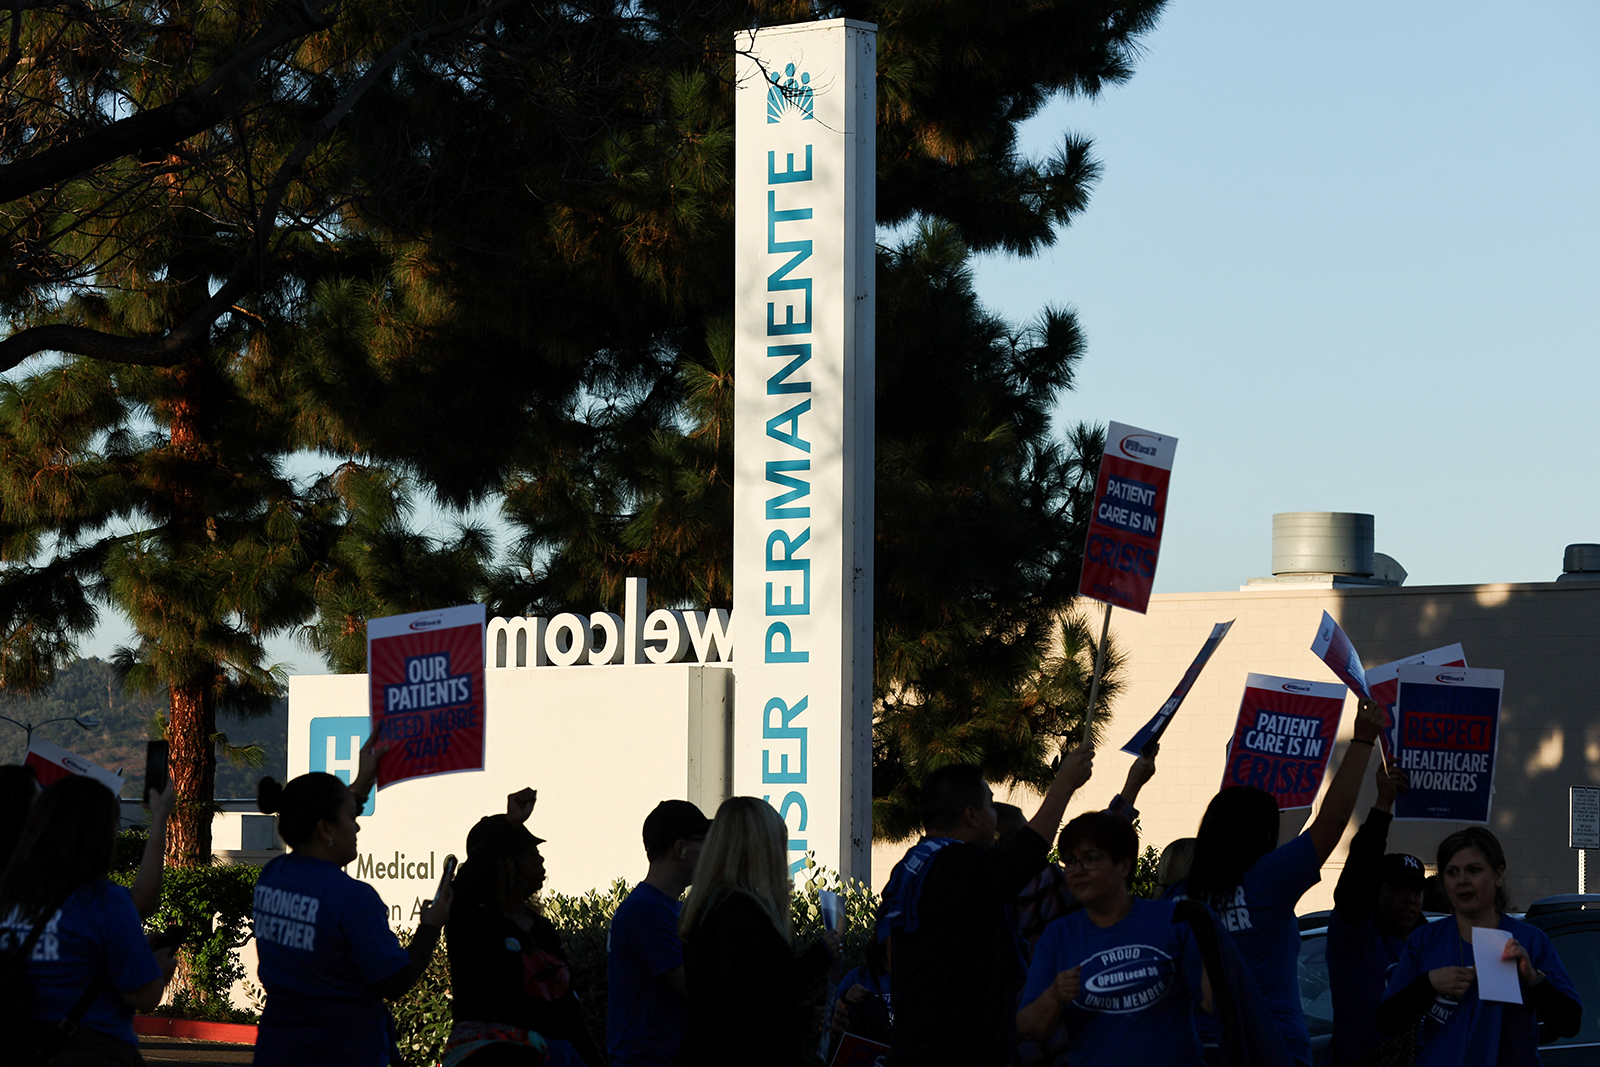 Kaiser Permanente healthcare workers striking today in San Diego, California. 